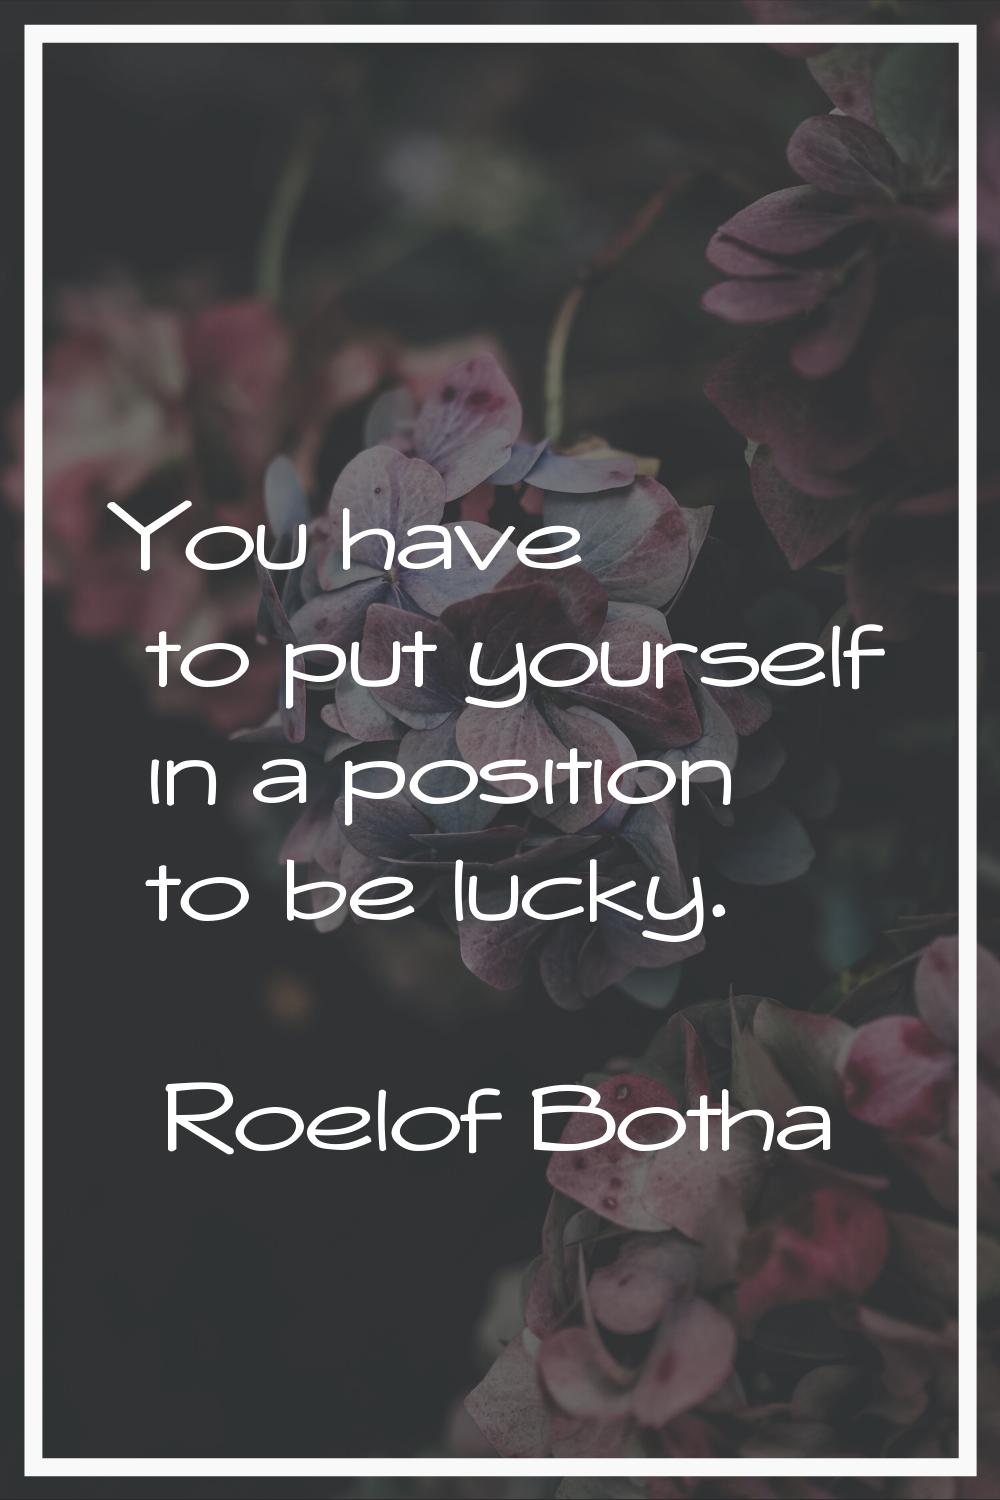 You have to put yourself in a position to be lucky.